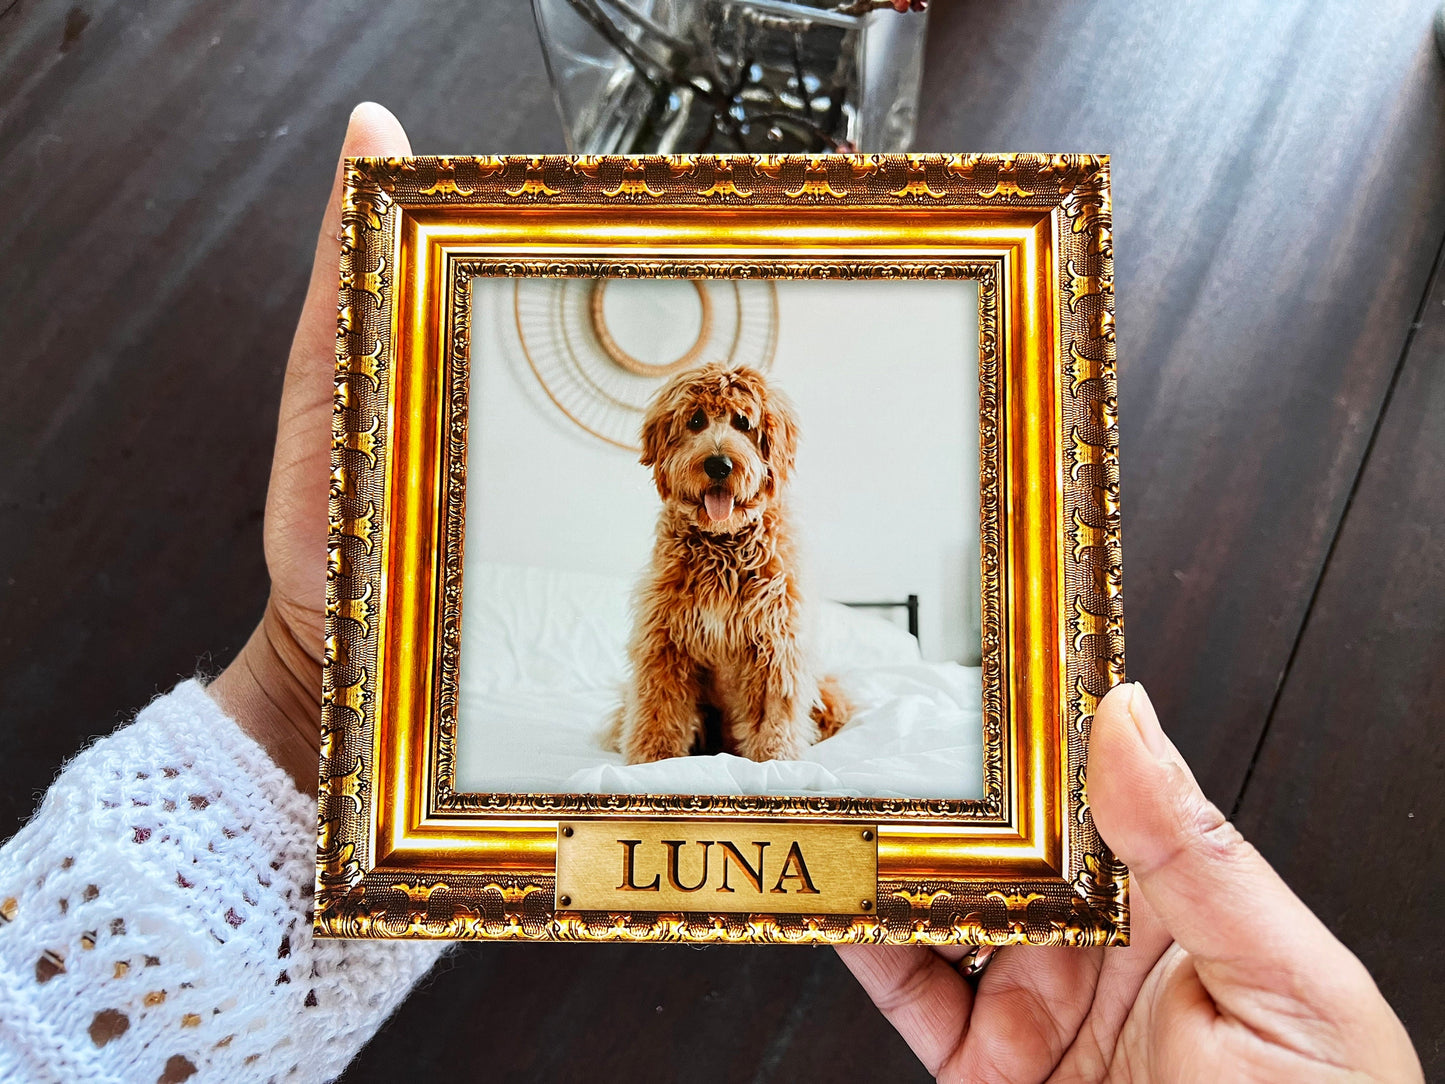 Personalized Gold Frame Style Pet Memorial 4" or 6" - NOT REAL GOLD Frame - Photo Print on Wood - Dog Memorial Frame - Pet Memorial